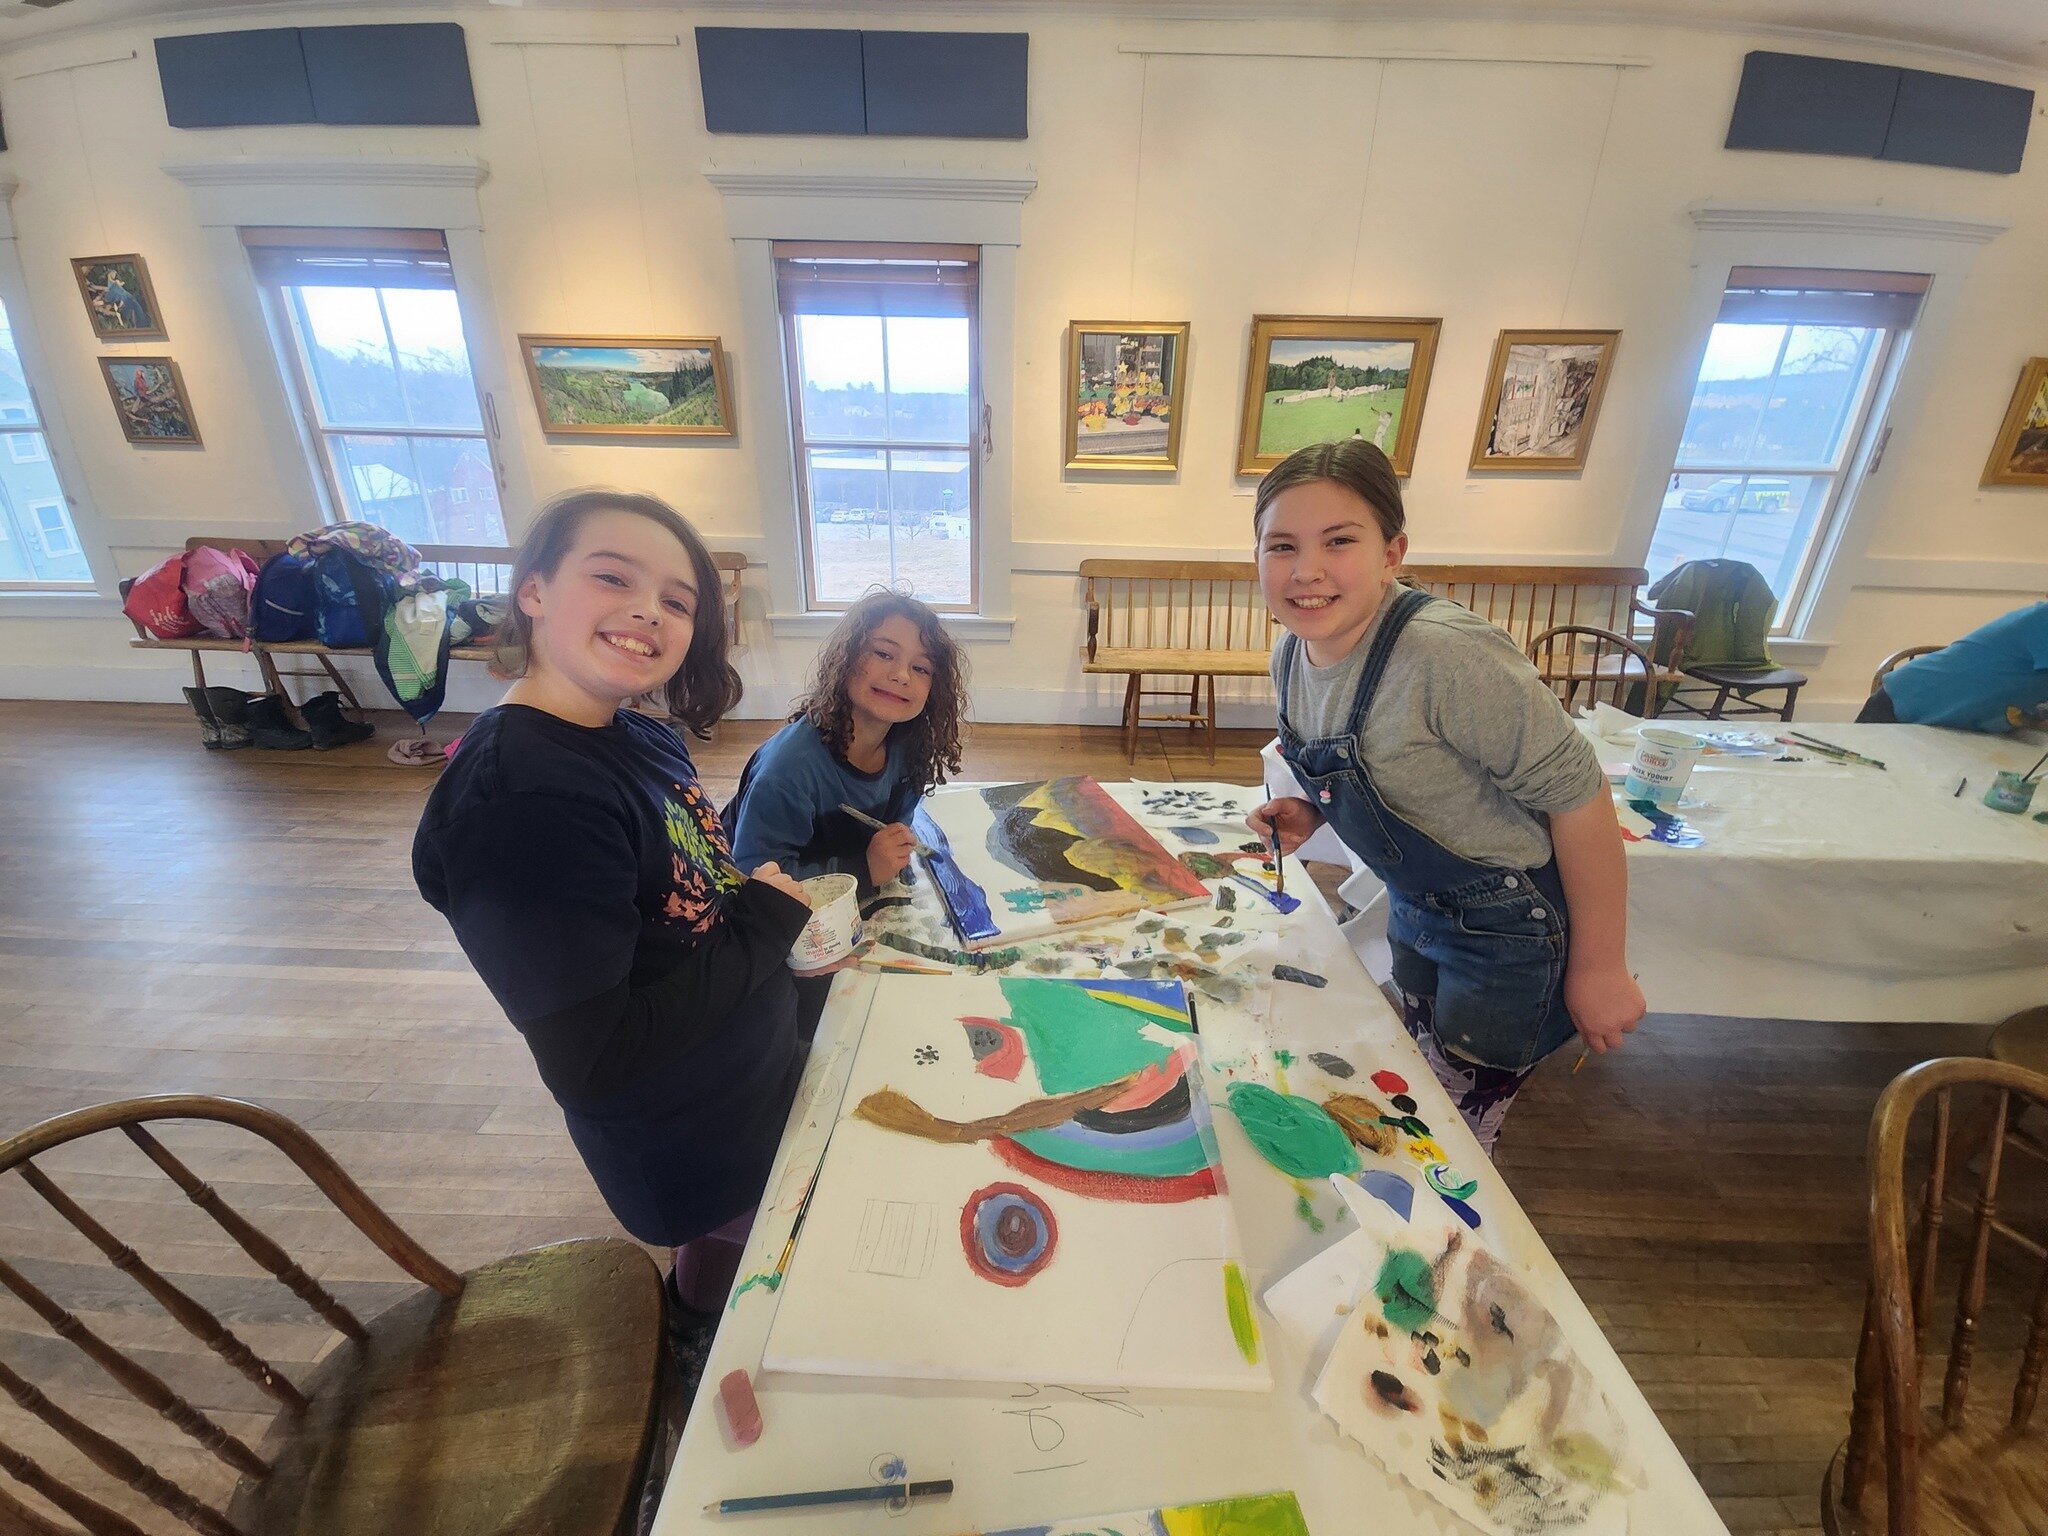 Thursday Afterschool Program in full swing! 🖌🖍✏️
.
.
Our students are working on the stories for their art and learning how to plan dimension and sketch perspective prior to painting.

There only a few spots left in the next after school series, so